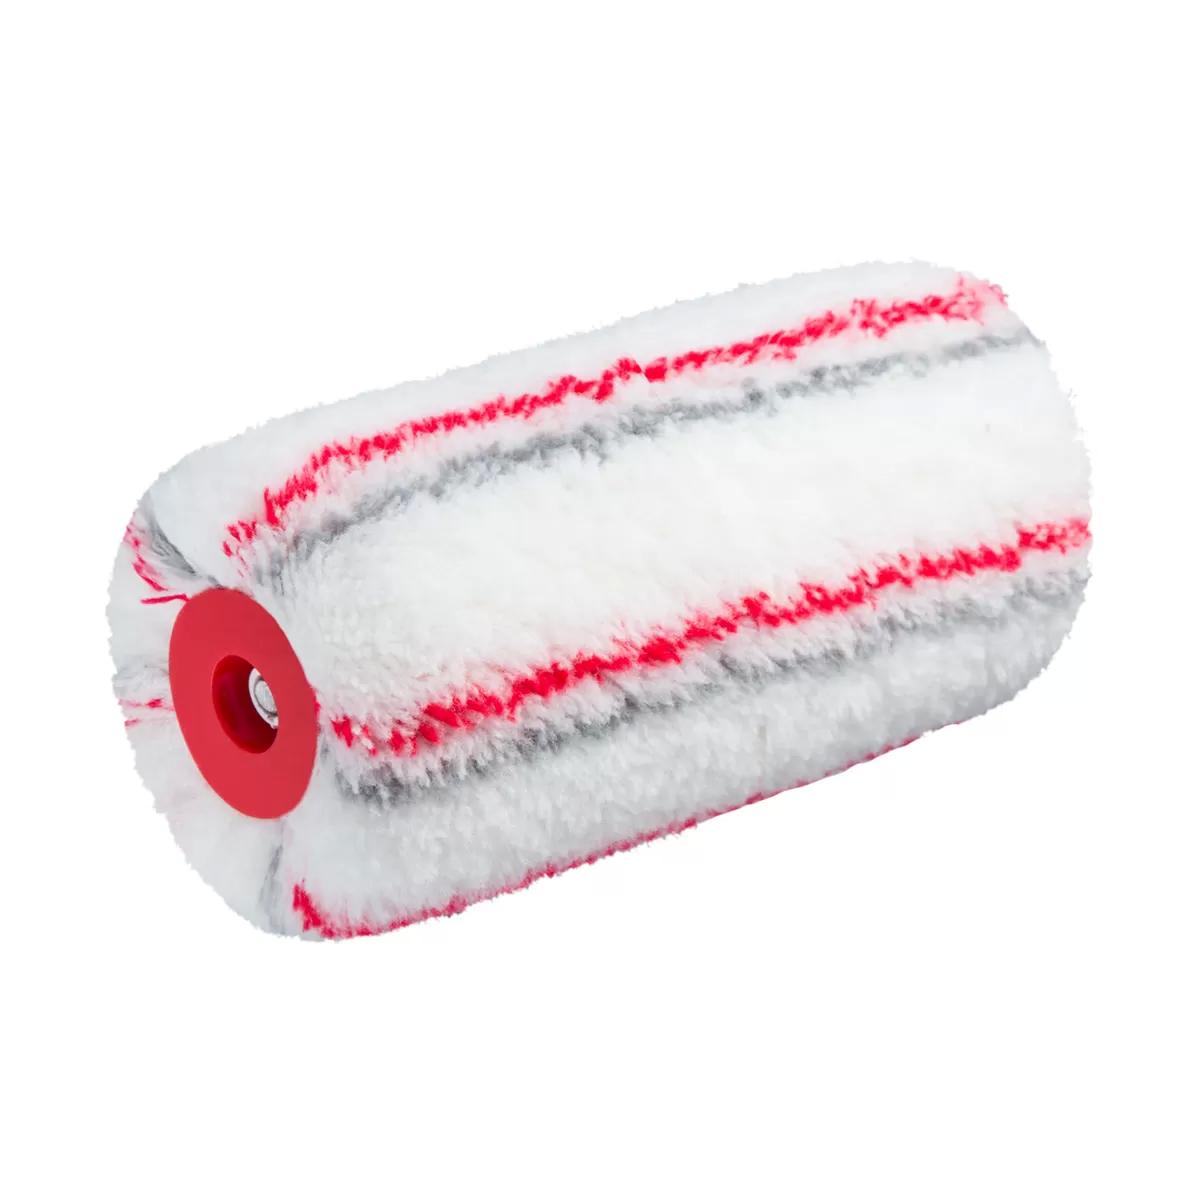 Paint roller Ultra Red Plus 18cm ø8 charge 